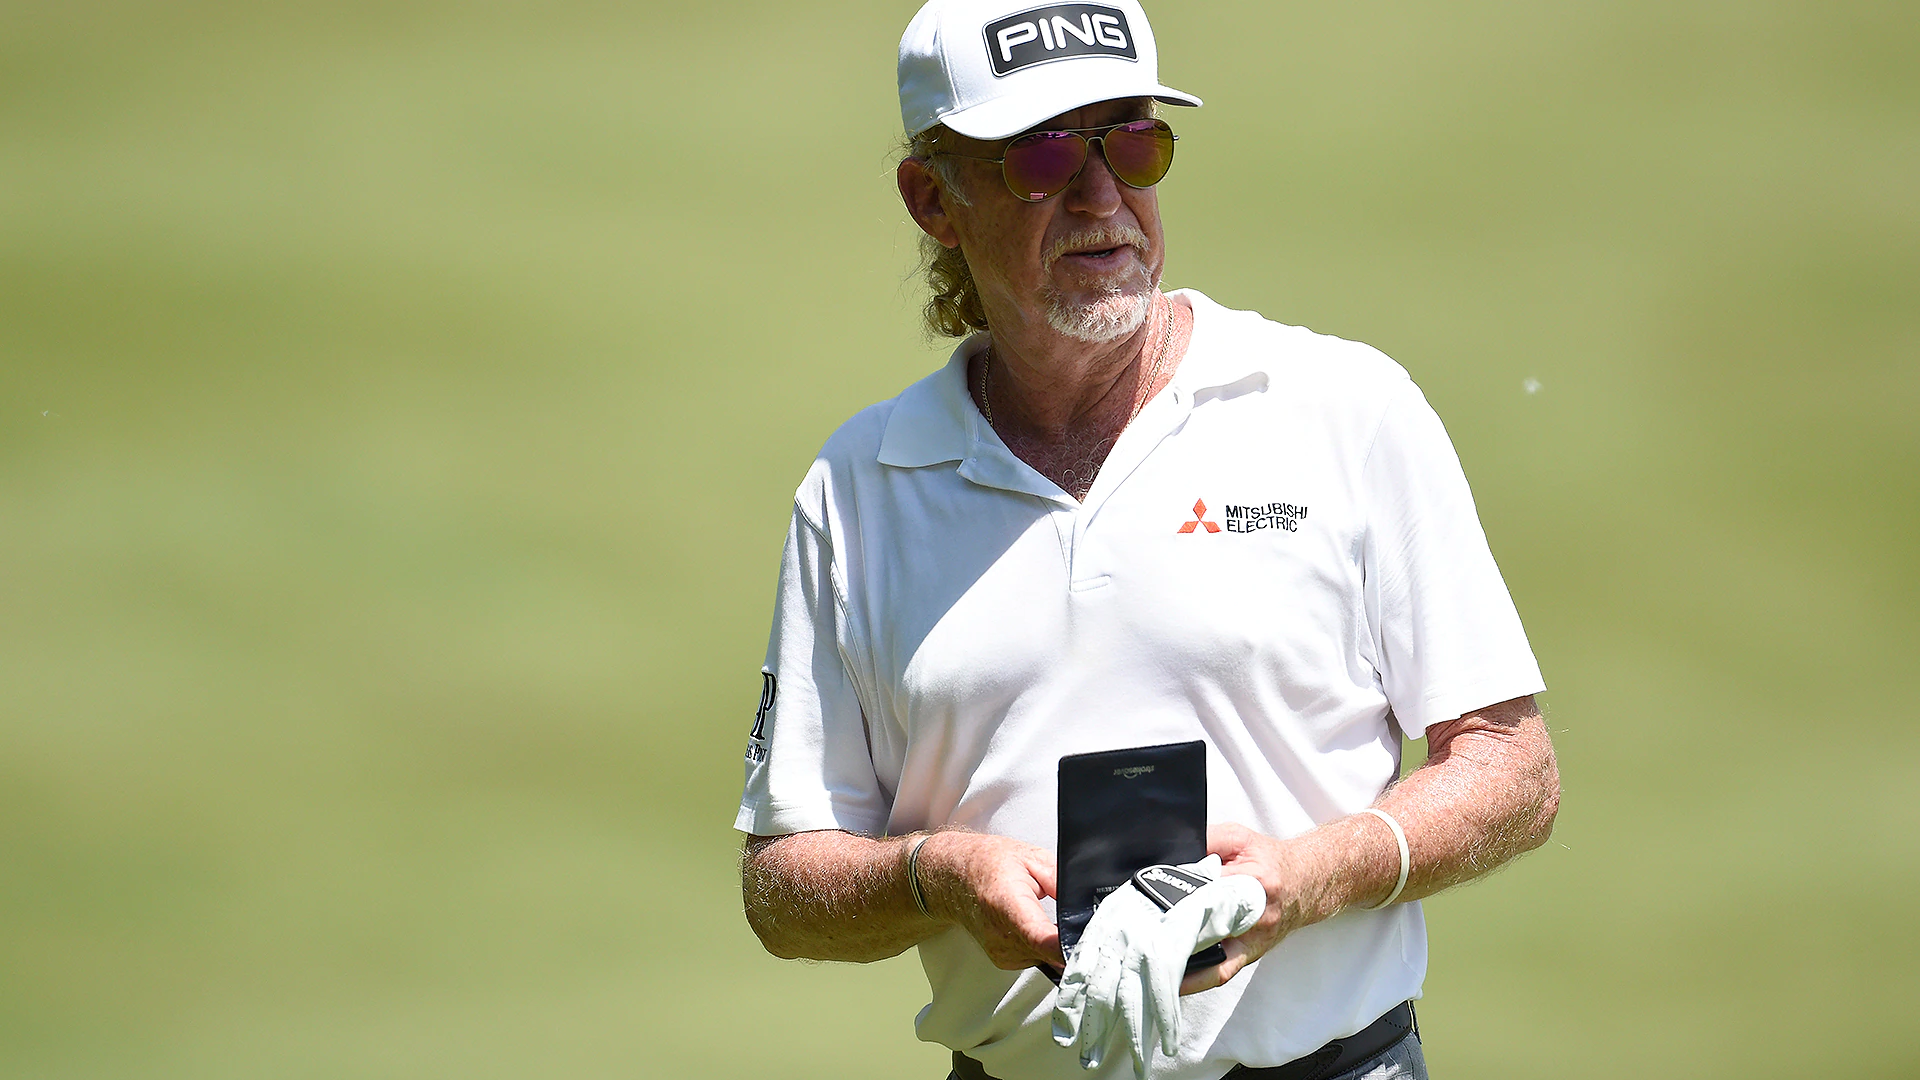 Miguel Angel Jimenez might ‘sweat like a pig,’ but he leads in hot Wisconsin